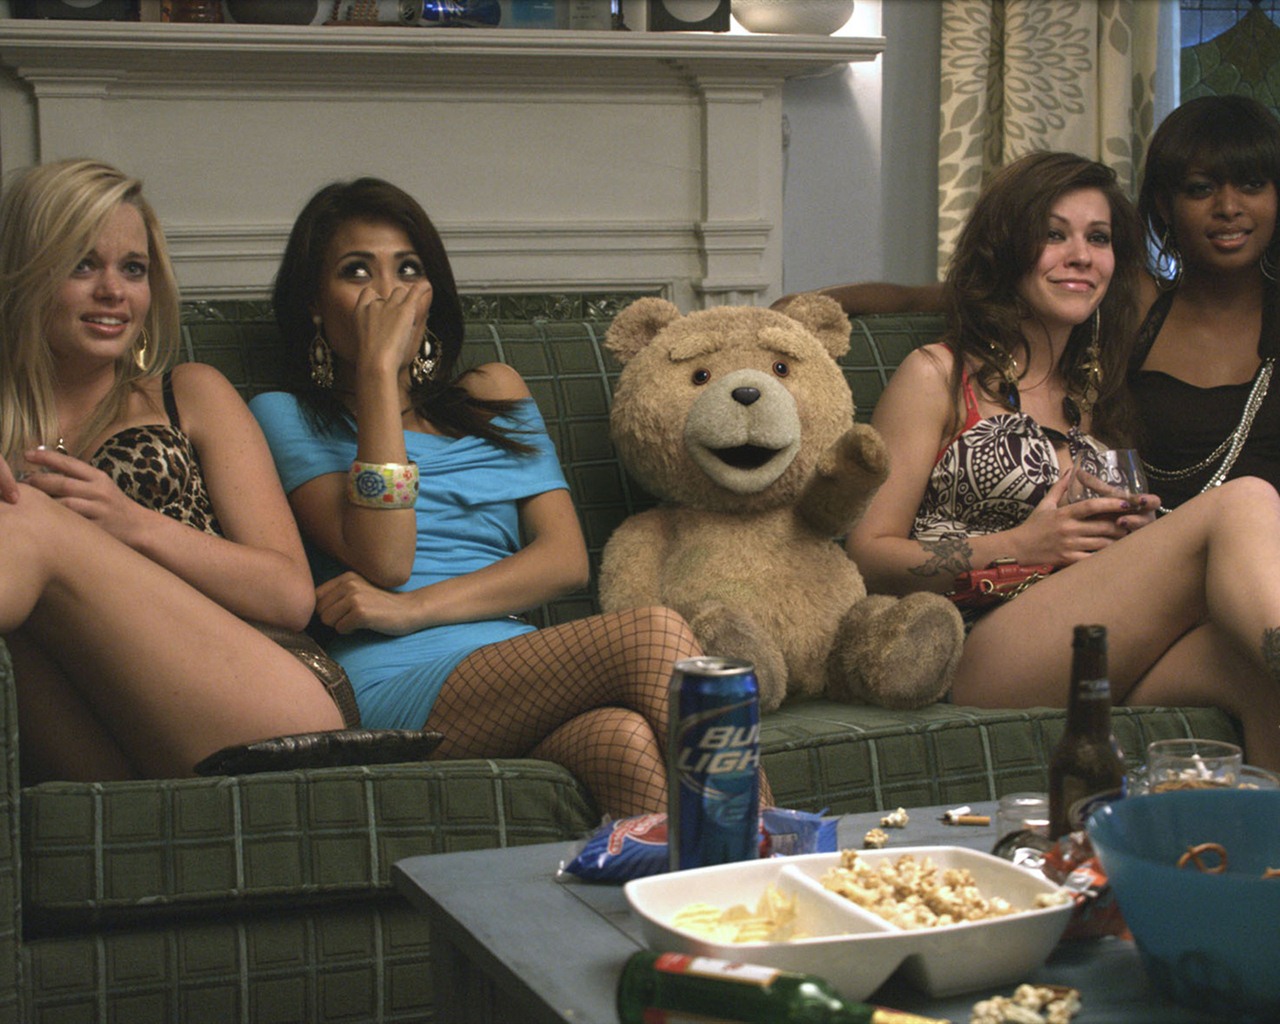 Ted 2012 HD movie wallpapers #6 - 1280x1024